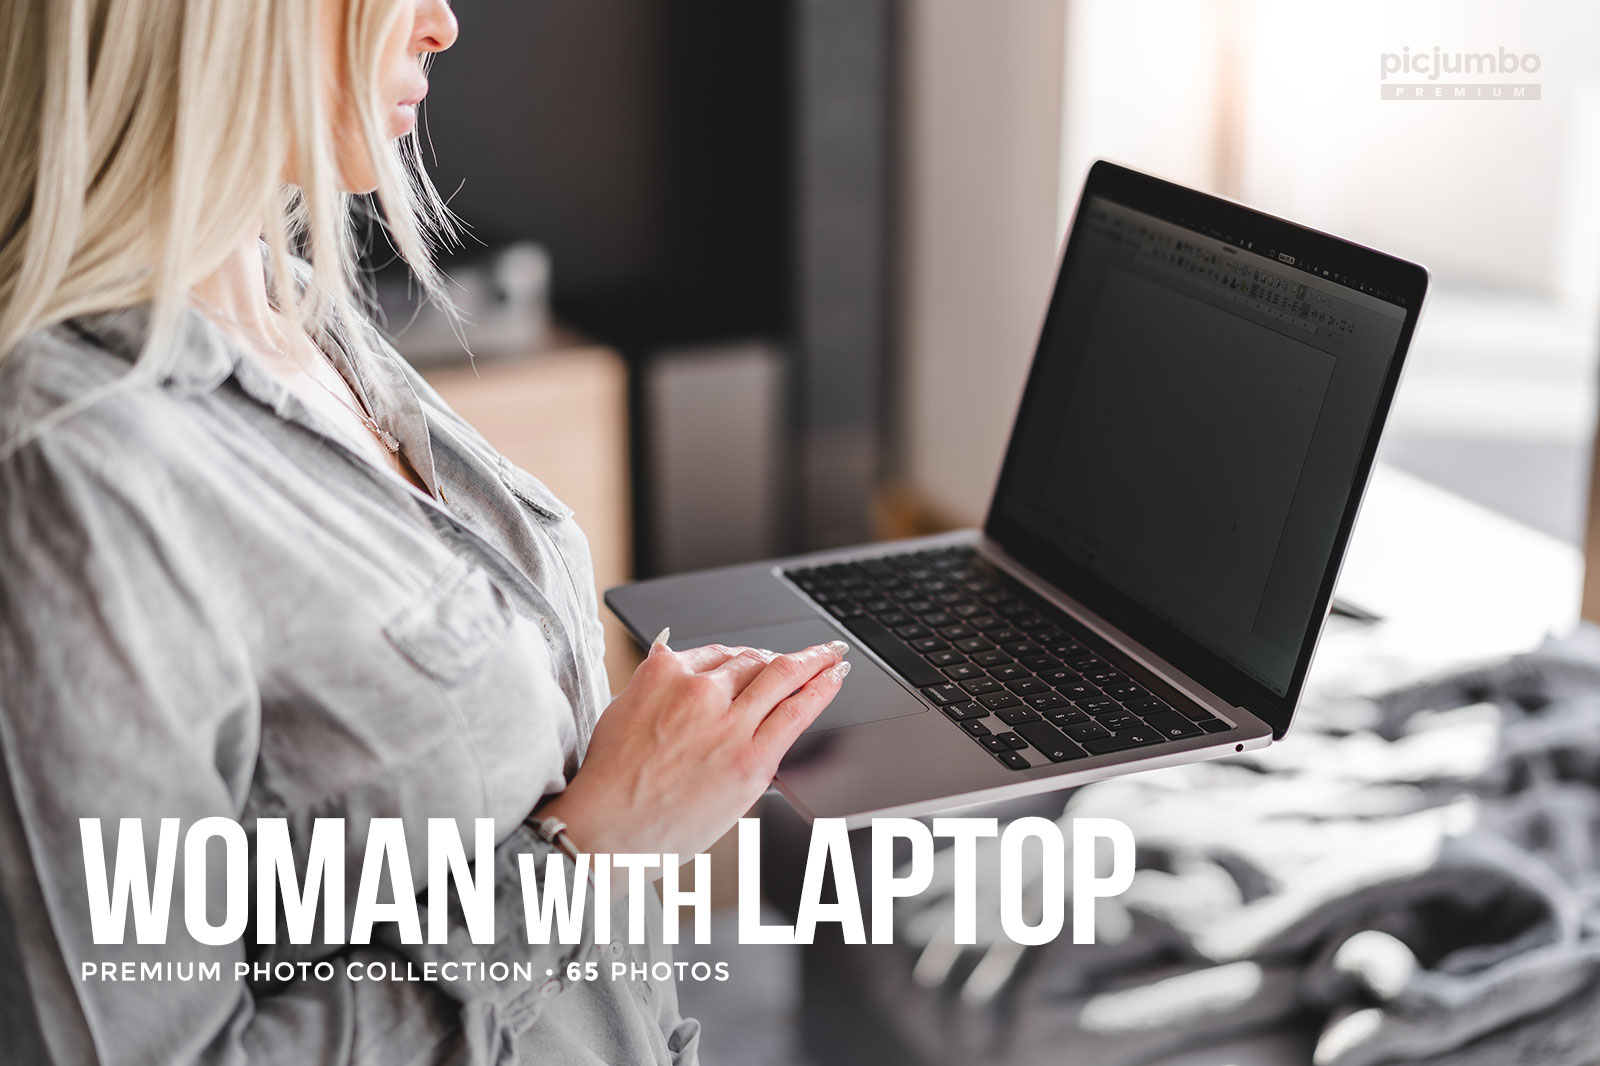 Woman with Laptop Stock Photo Collection